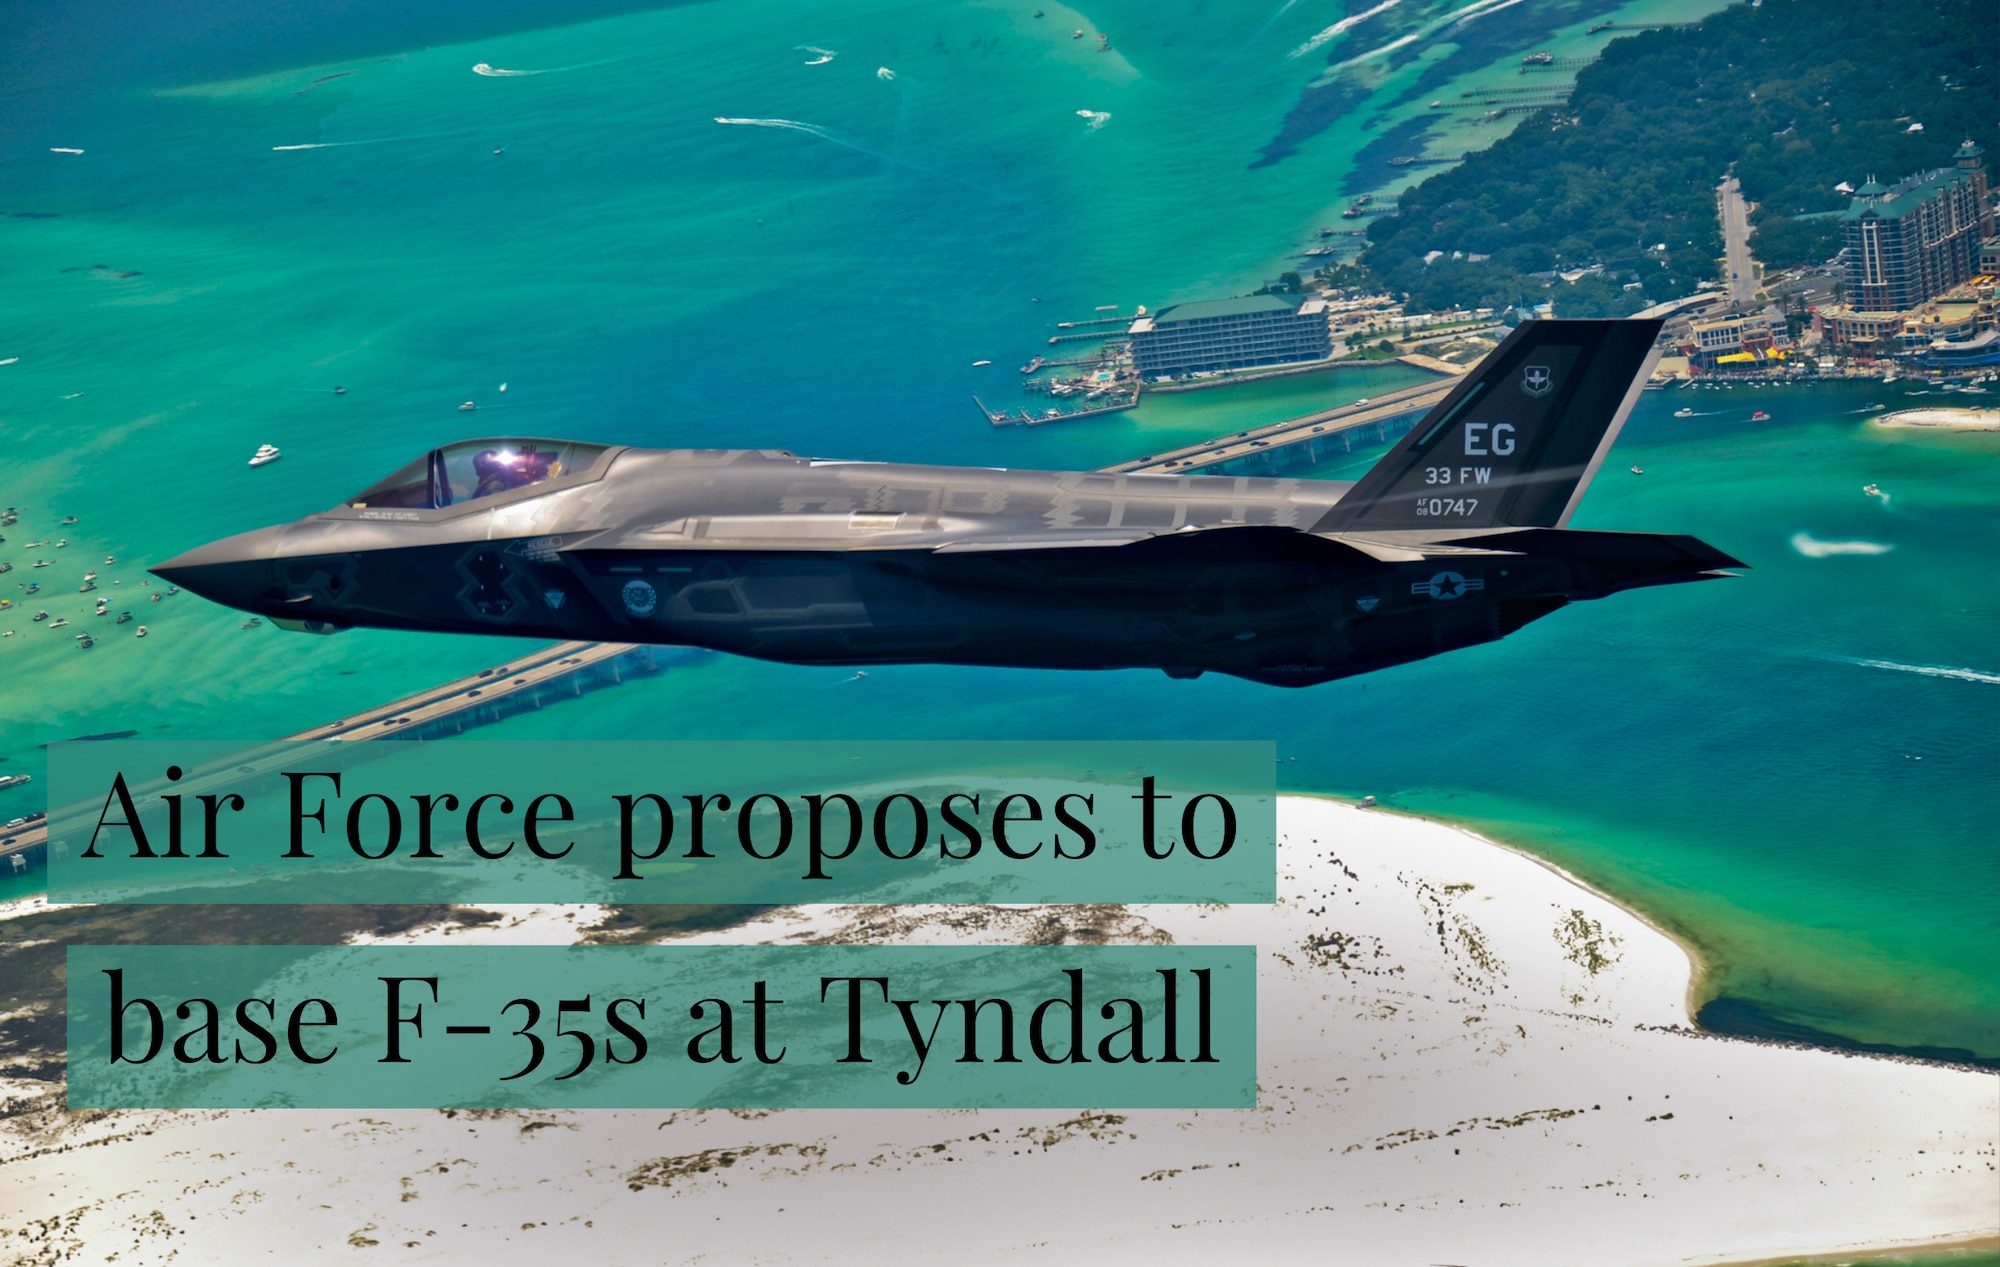 Air Force proposes to base F-35s at Tyndall, supplemental funds needed to build advanced fighter base